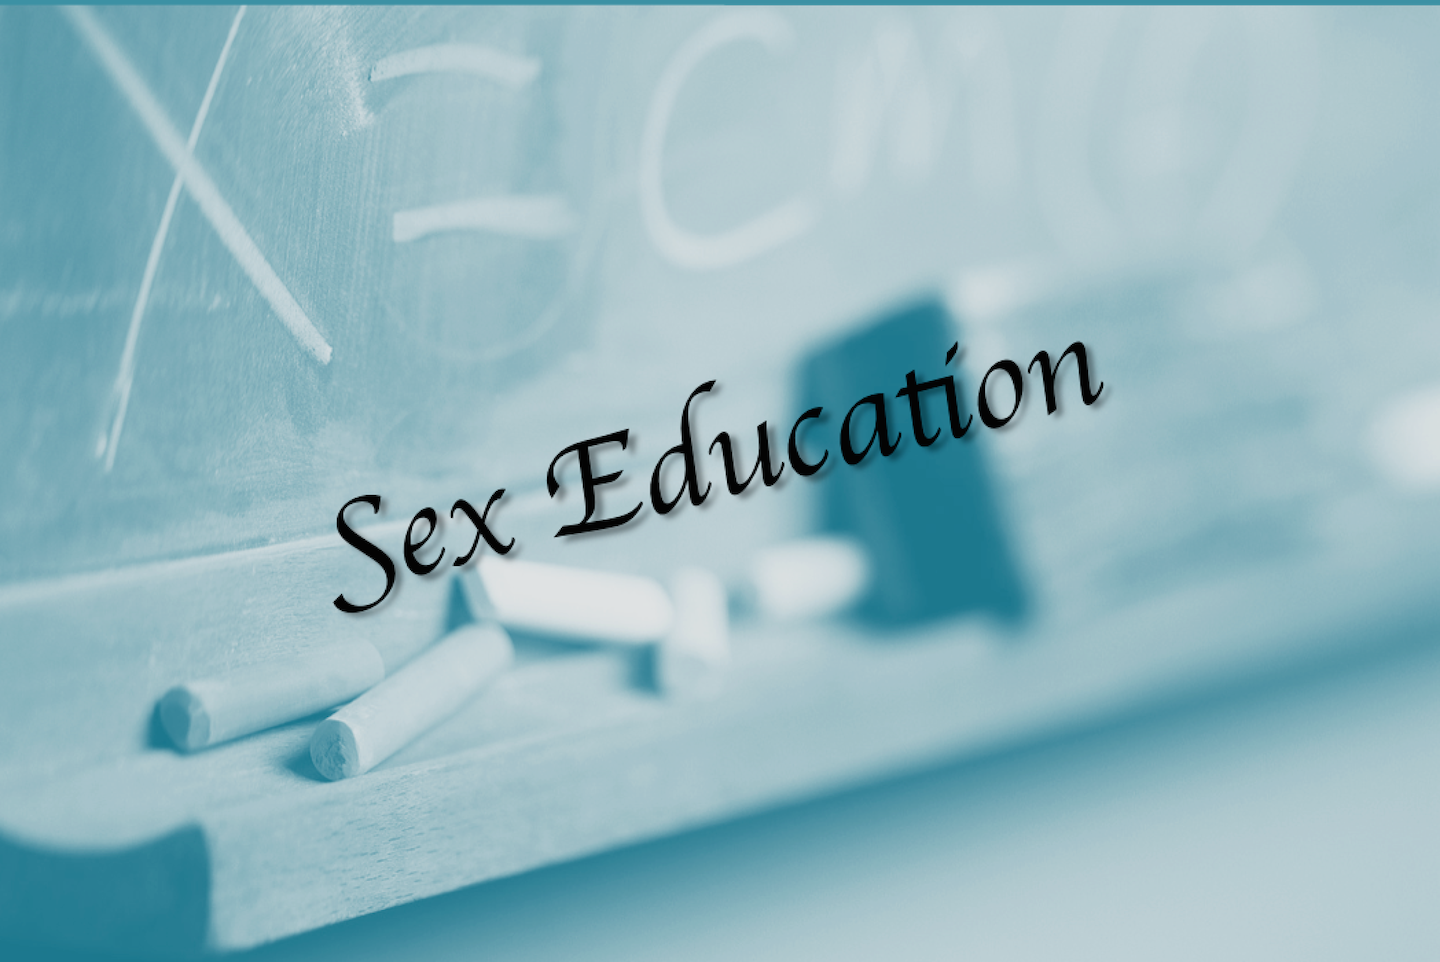 Whisky G. reccomend Sex education is not a necessity